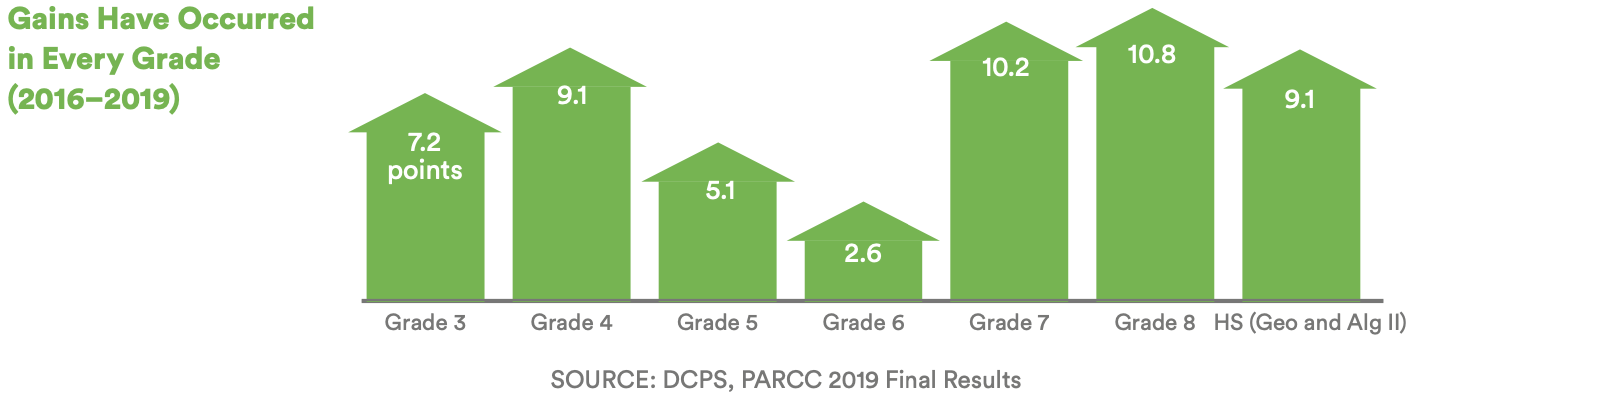 A bar chart with 7 bars shwoing that proficiency gains have occurred in every grade from 2016 through 2019. The grades included are Grade 3 , Grade 4, Grade 5, Grade 6, Grade 7, Grade 8, and high school Geometry and Algebra II.